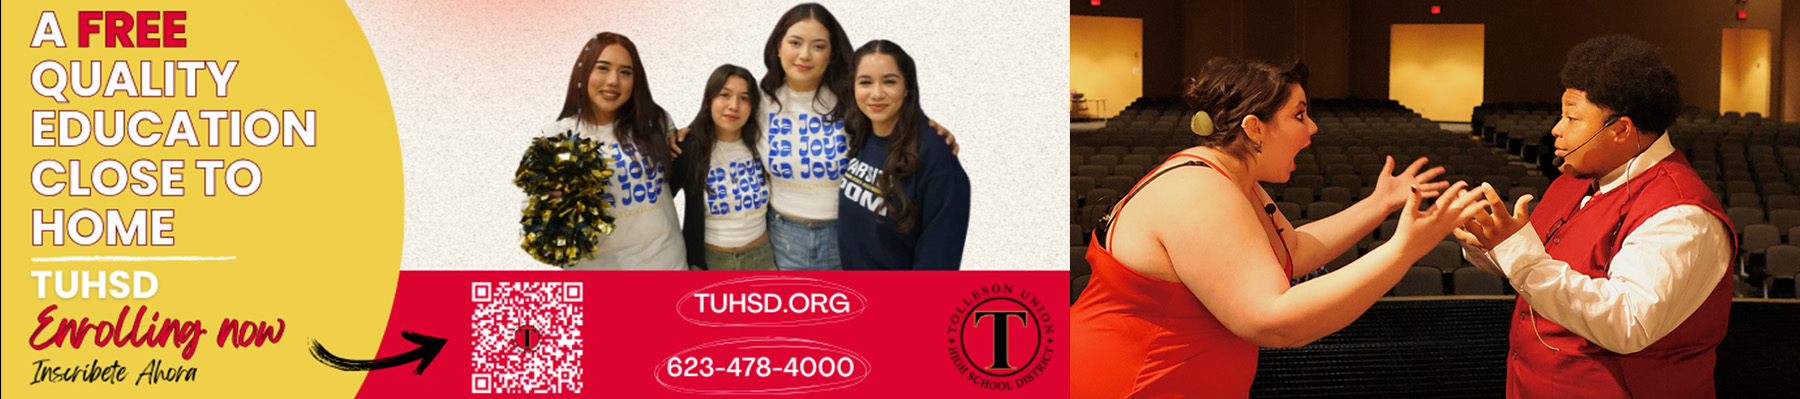 SUPPORT OUR SCHOOLS WITH A TAX CREDIT DONATION! Single person donation of $200 or married joint filing donation of $400 Remember TUHSD when you're filing your taxes! | National School social workers